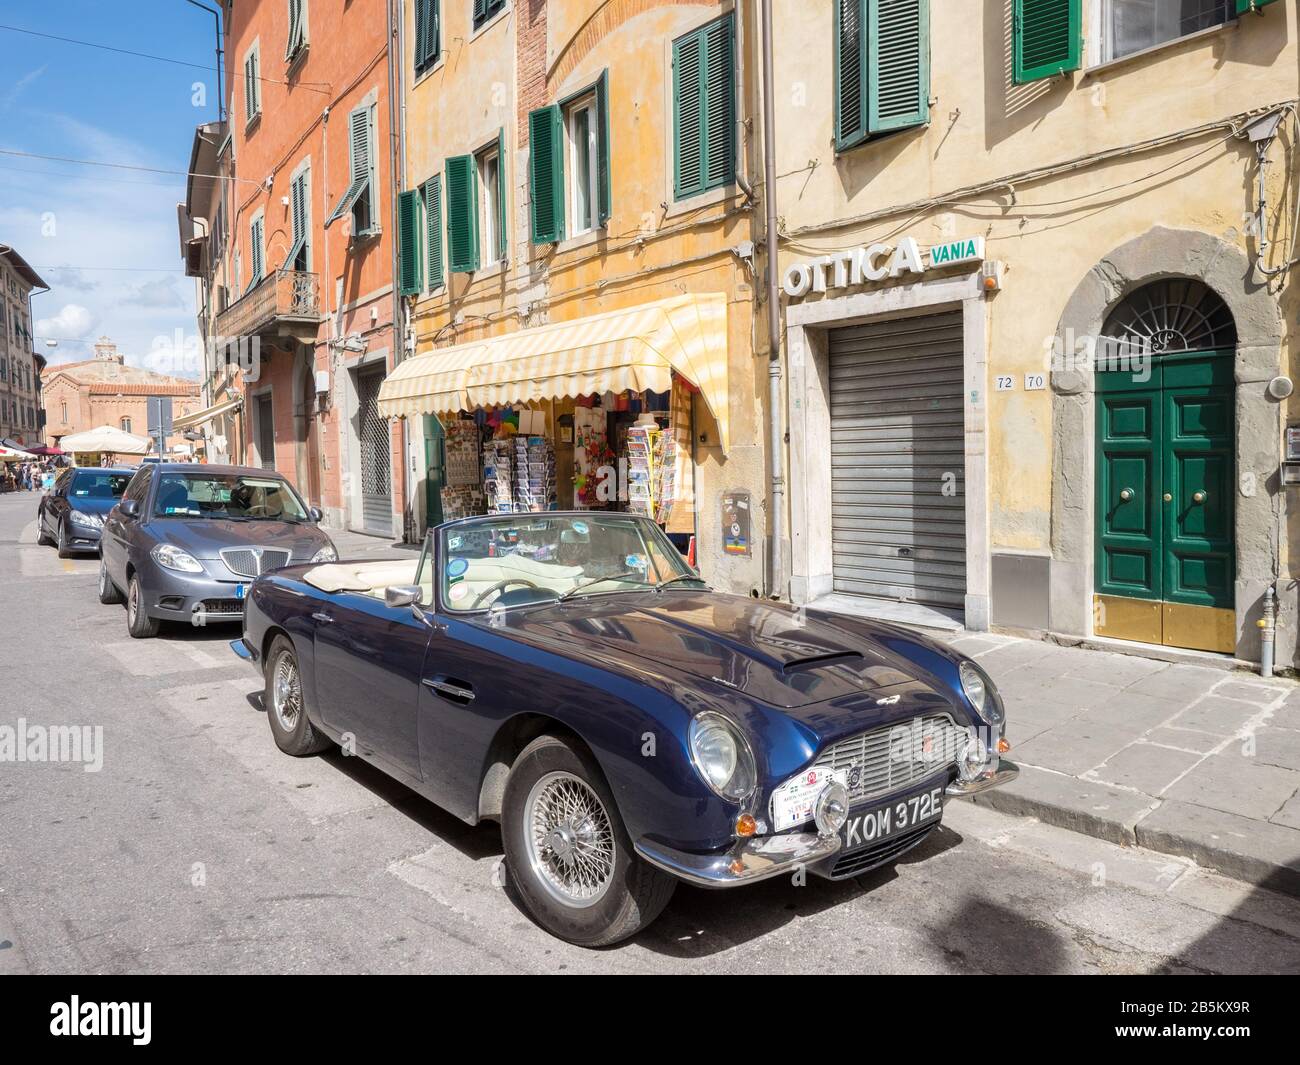 Vintage car from Aston Martin parked on a vintage street in Pisa, Tuscany, Italy Stock Photo